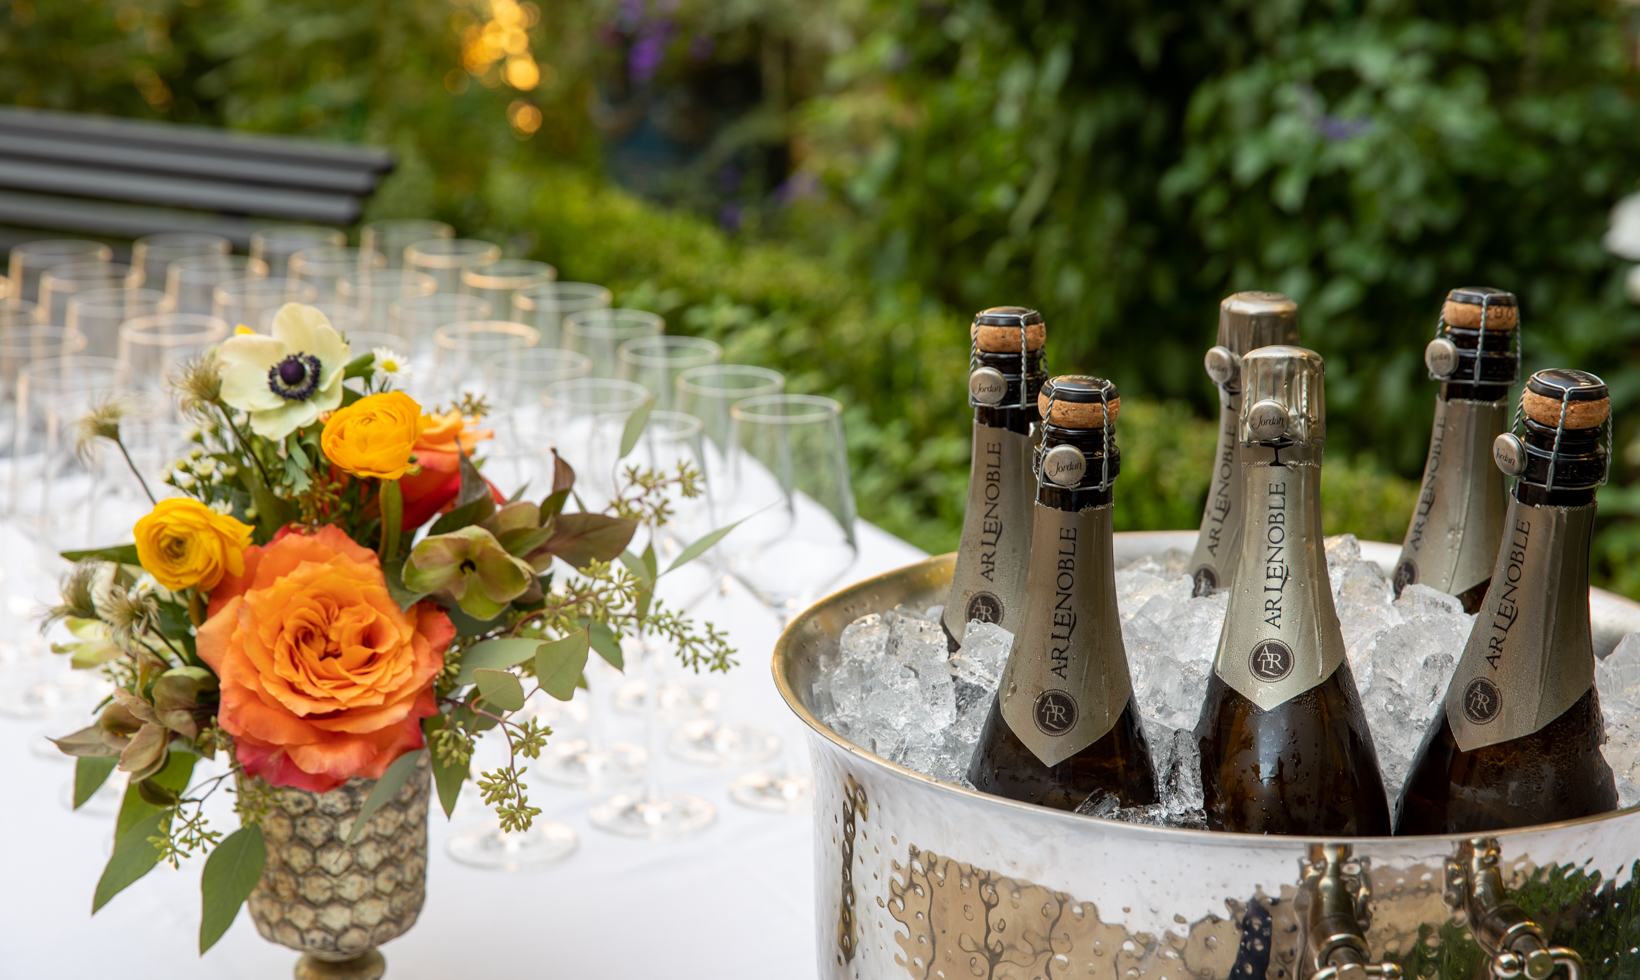 champagne in ice bucket with flowers and glasses on table